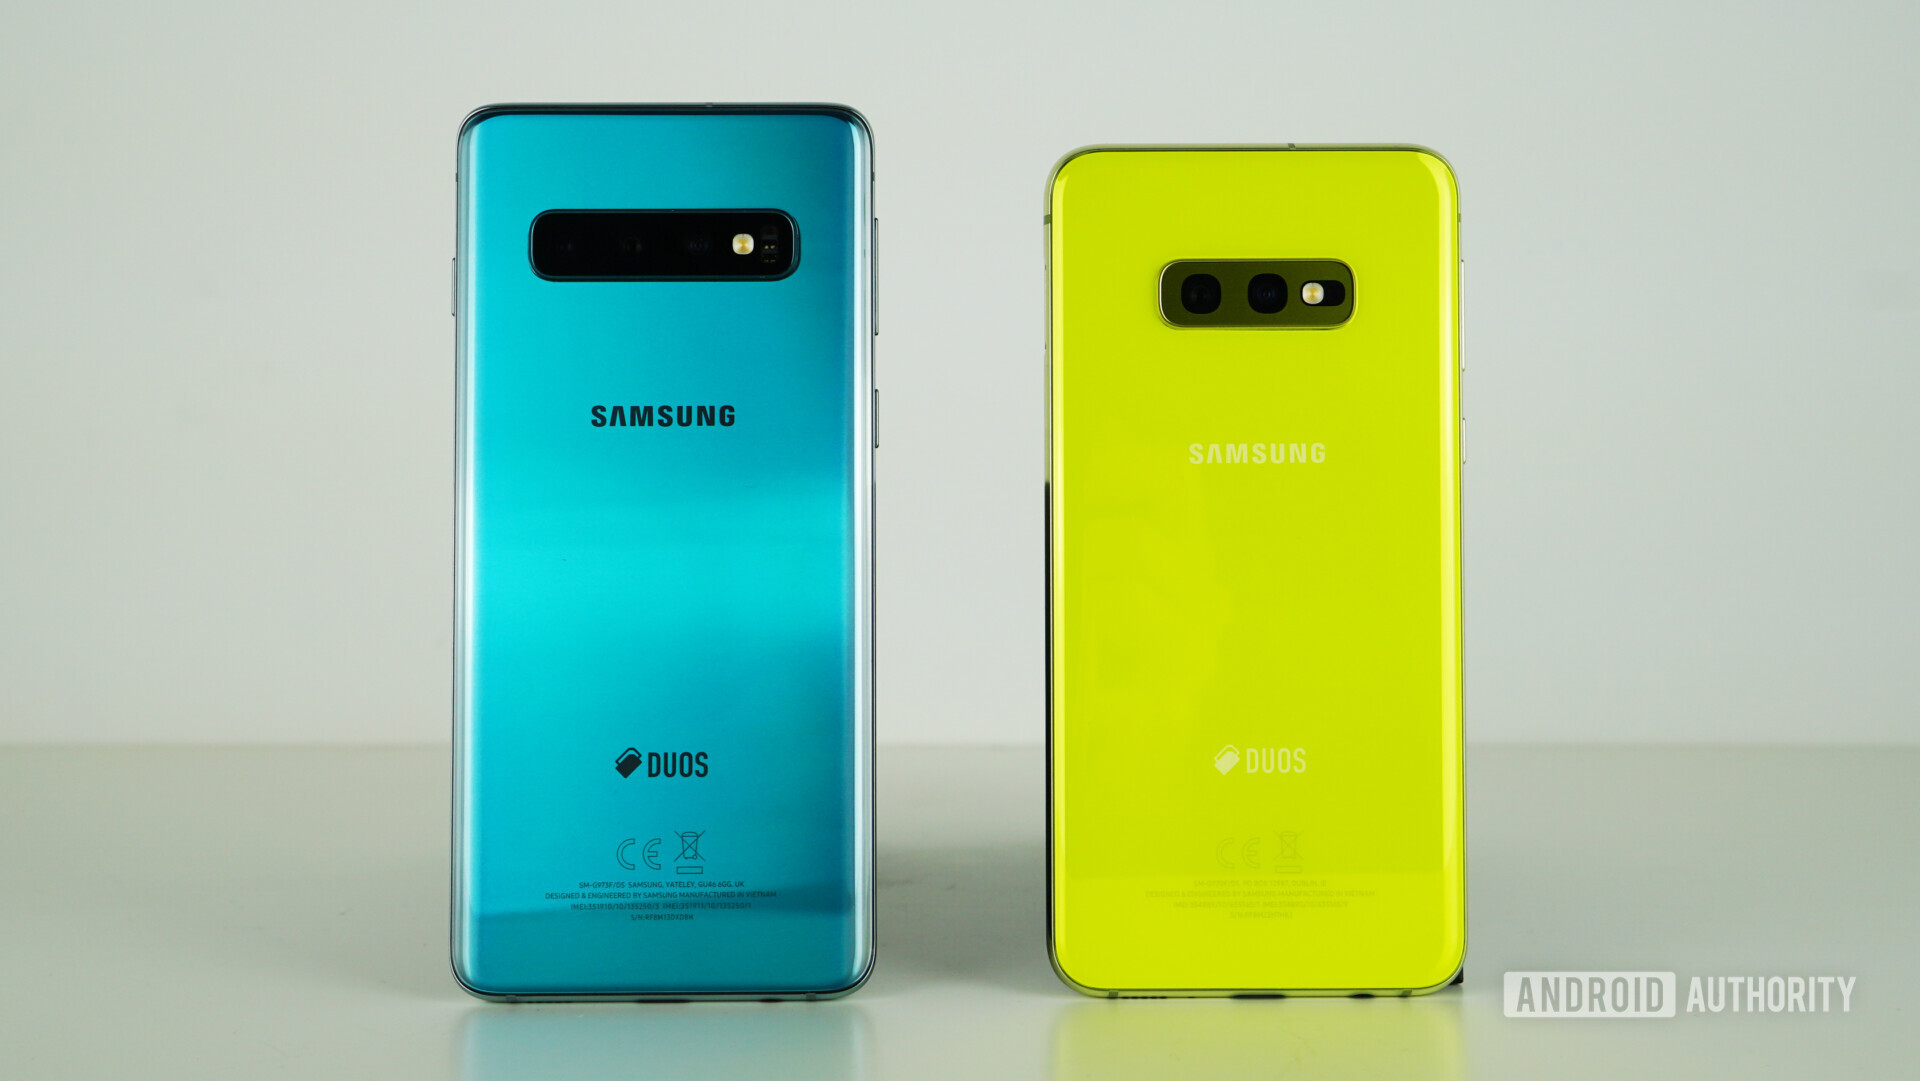 Samsung Galaxy S10 Snapdragon 855 vs Exynos 9820 - Android Authority